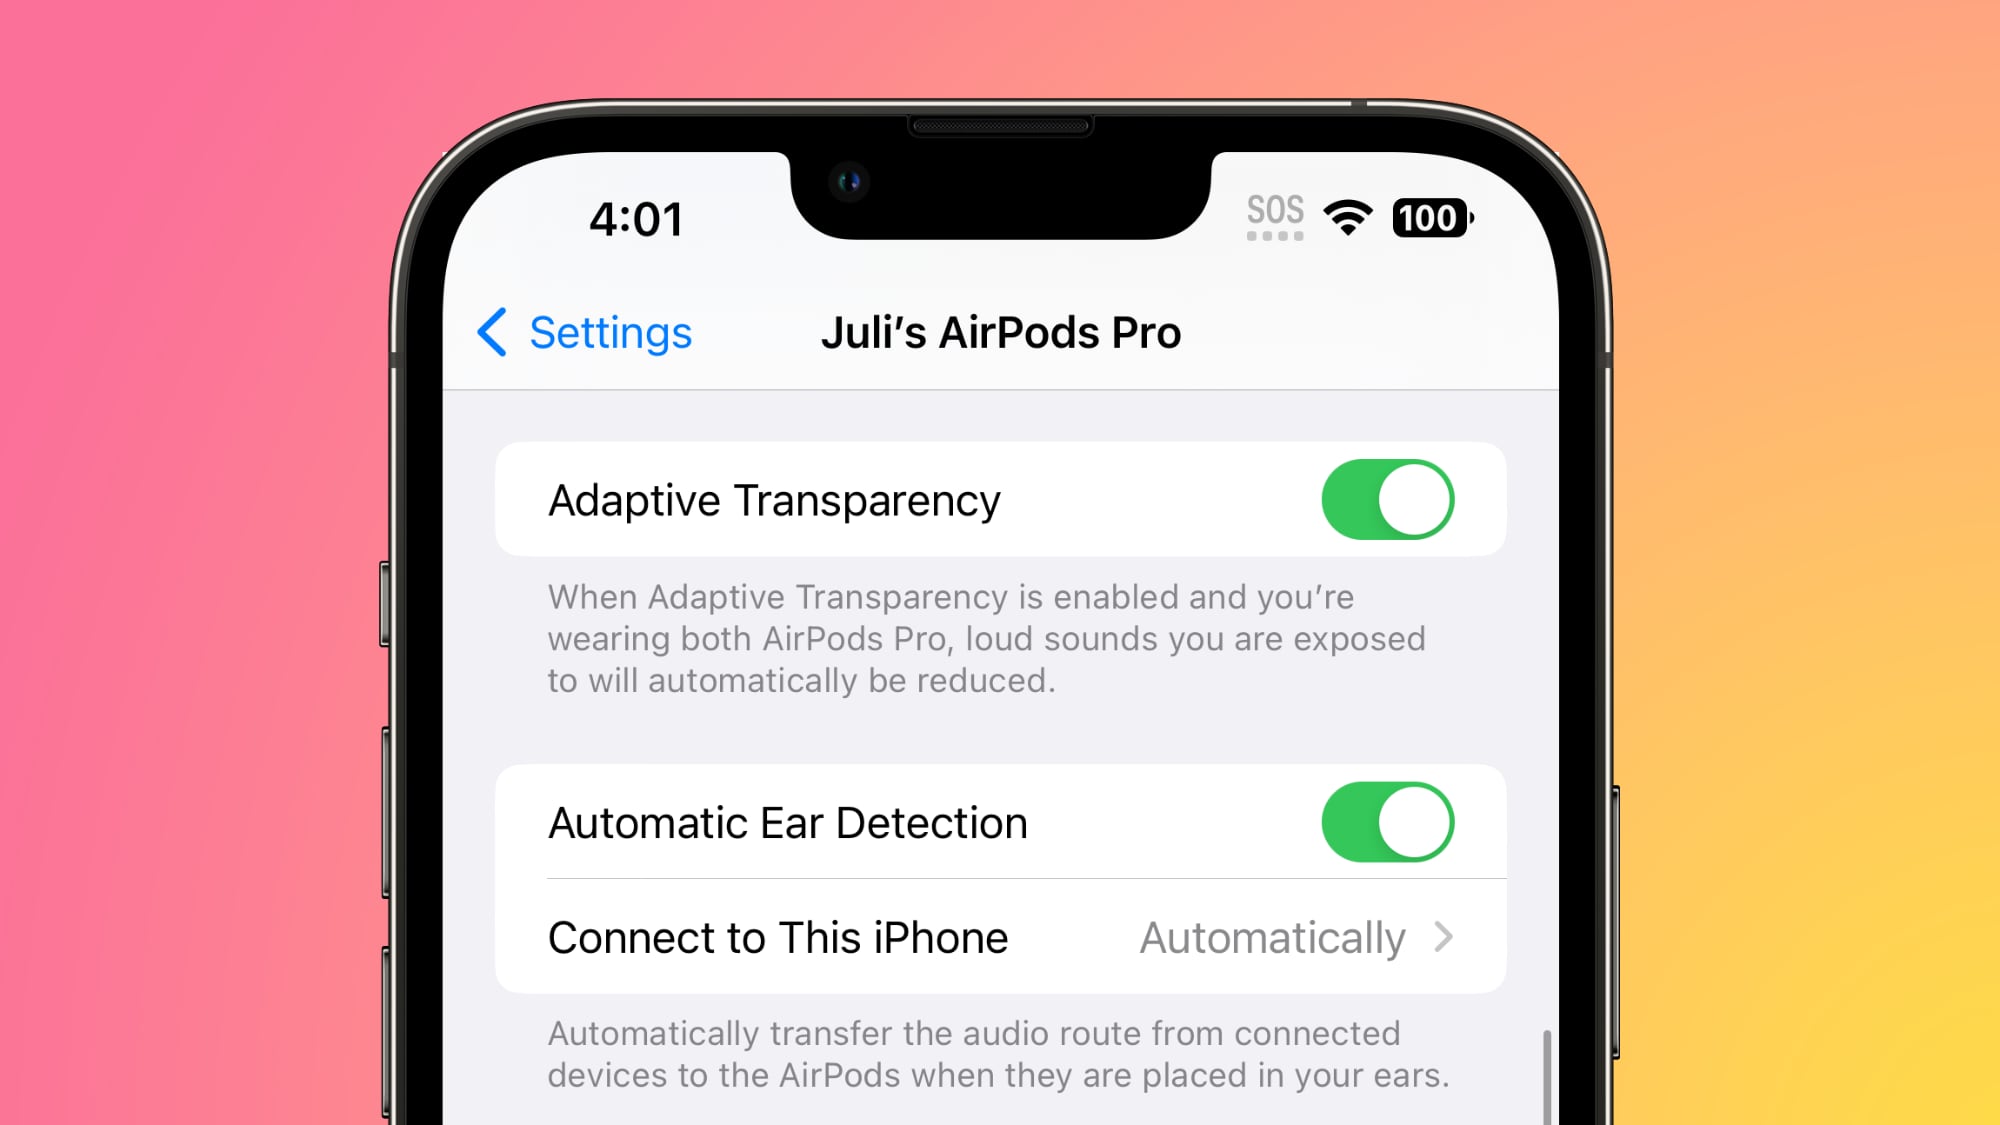 Latest iOS 16.1 Beta Removes Adaptive Transparency Toggle for Original AirPods Pro, Confirming Bug